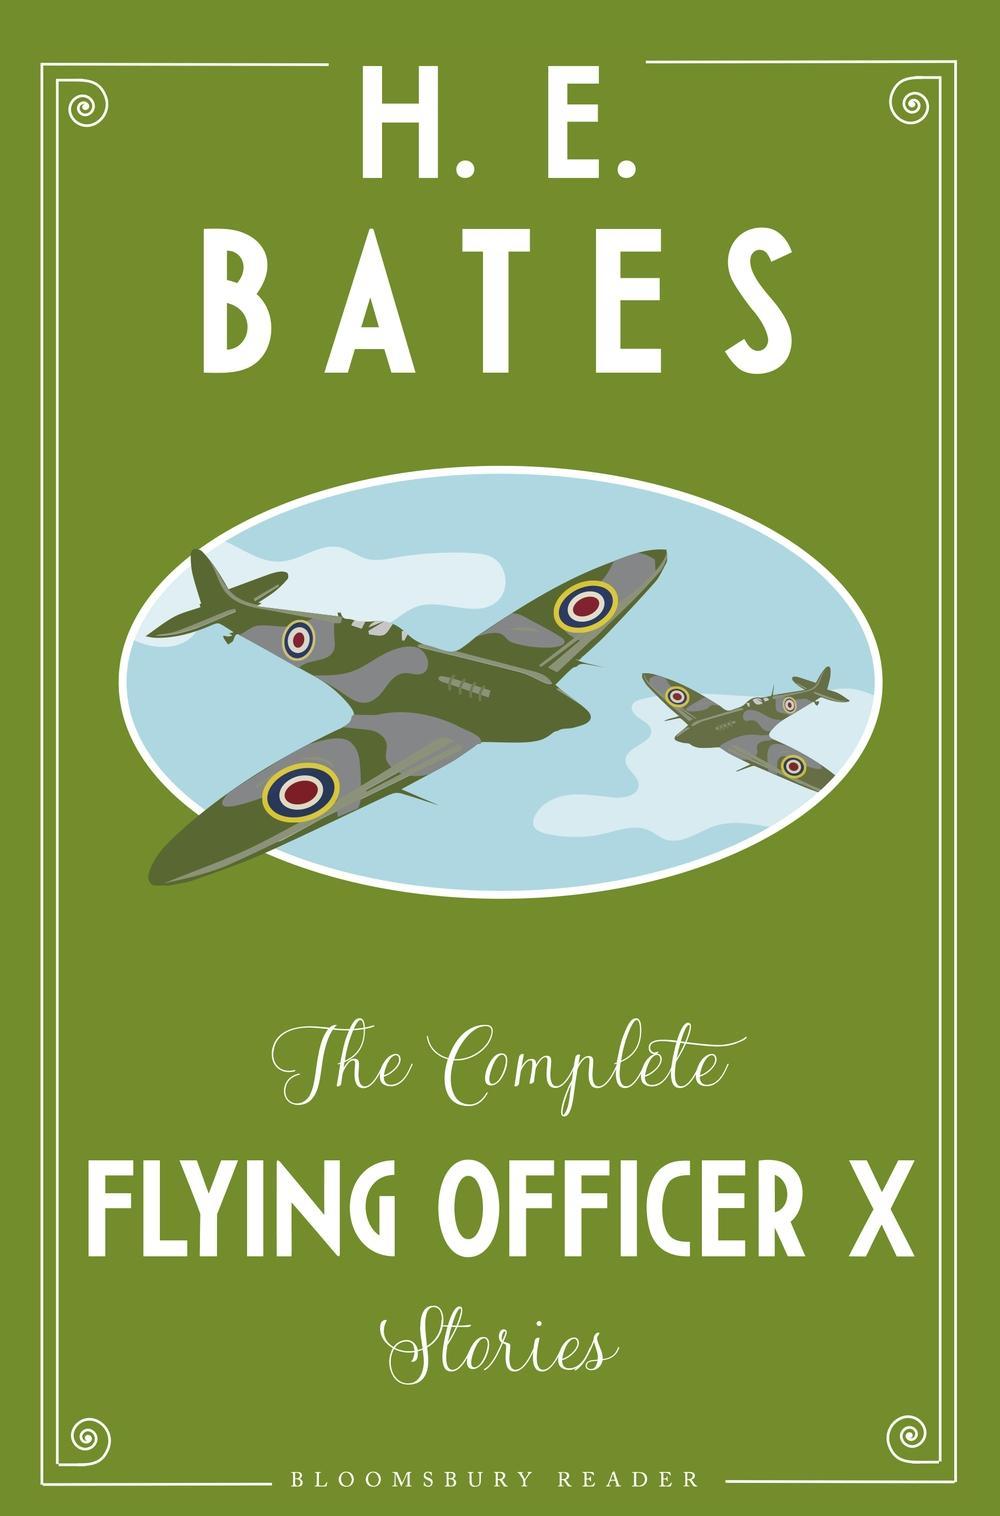 Complete Flying Officer X Stories